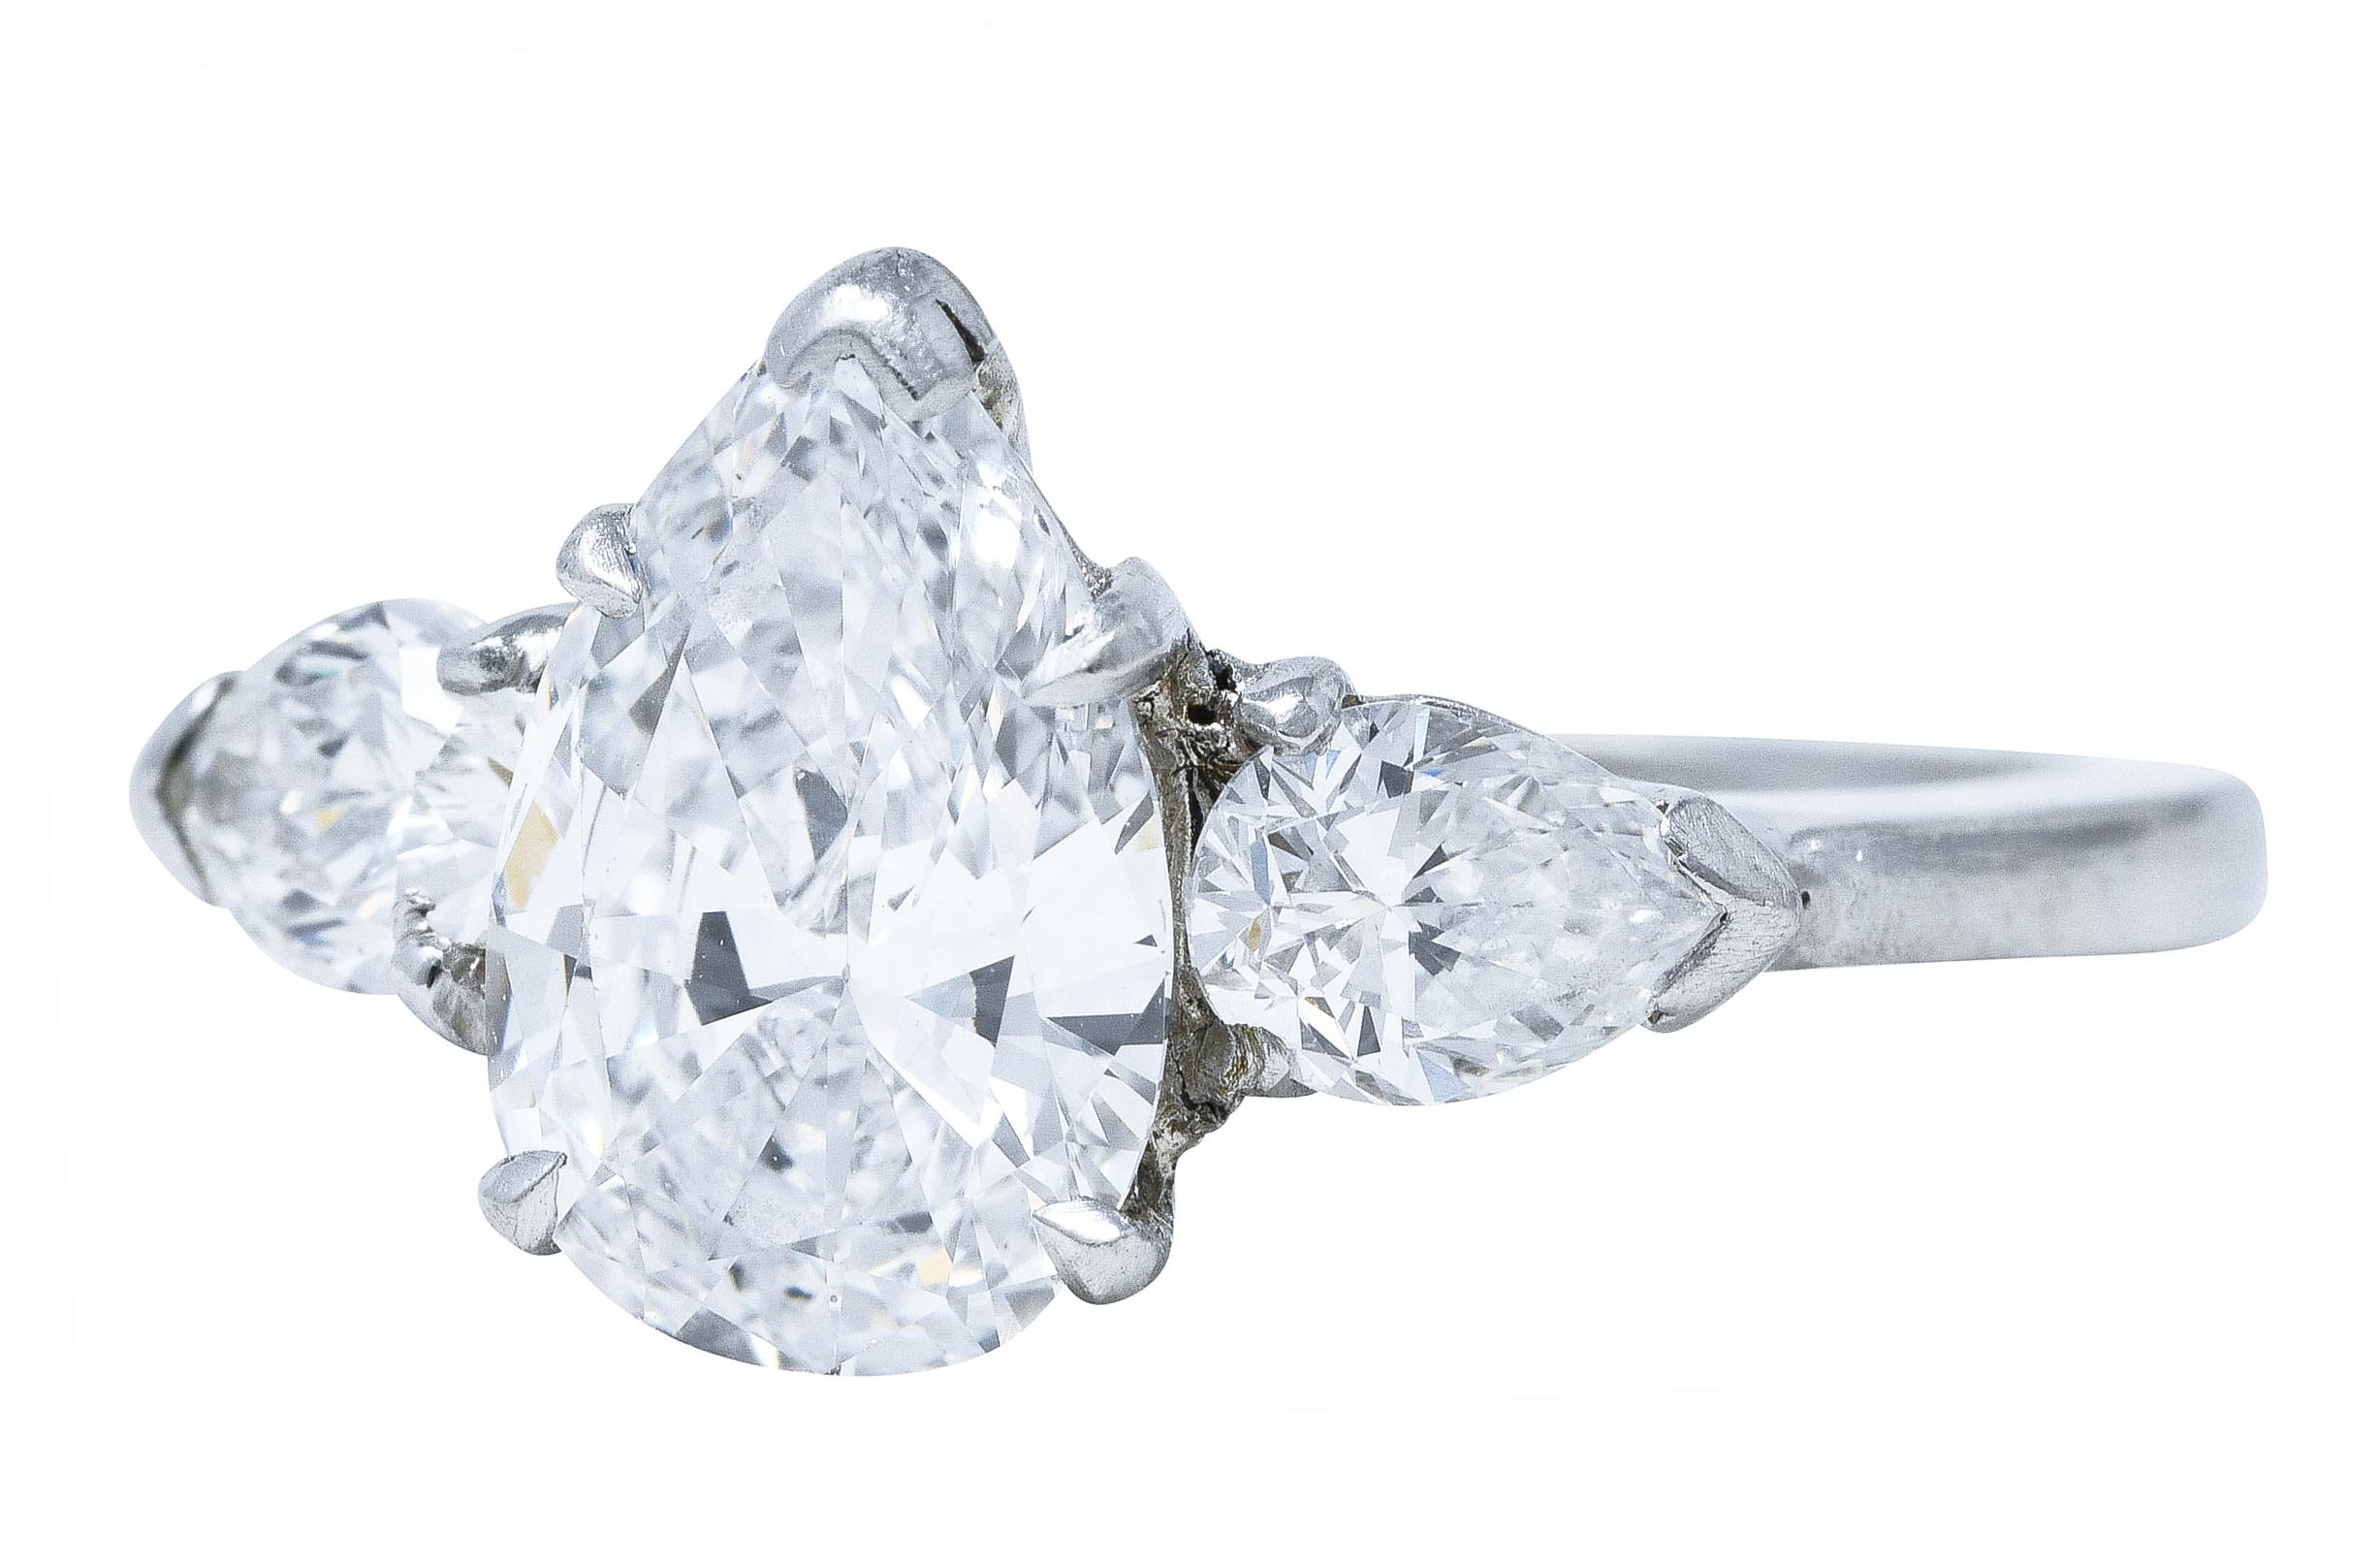 Ring centers basket set pear cut diamond weighing 1.56 carat total - D in color with VS1 clarity

Flanked by cathedral shoulders prong set with two pear cut diamonds

Weighing approximately 0.50 carat total - F/G in color with VS clarity

Tested as